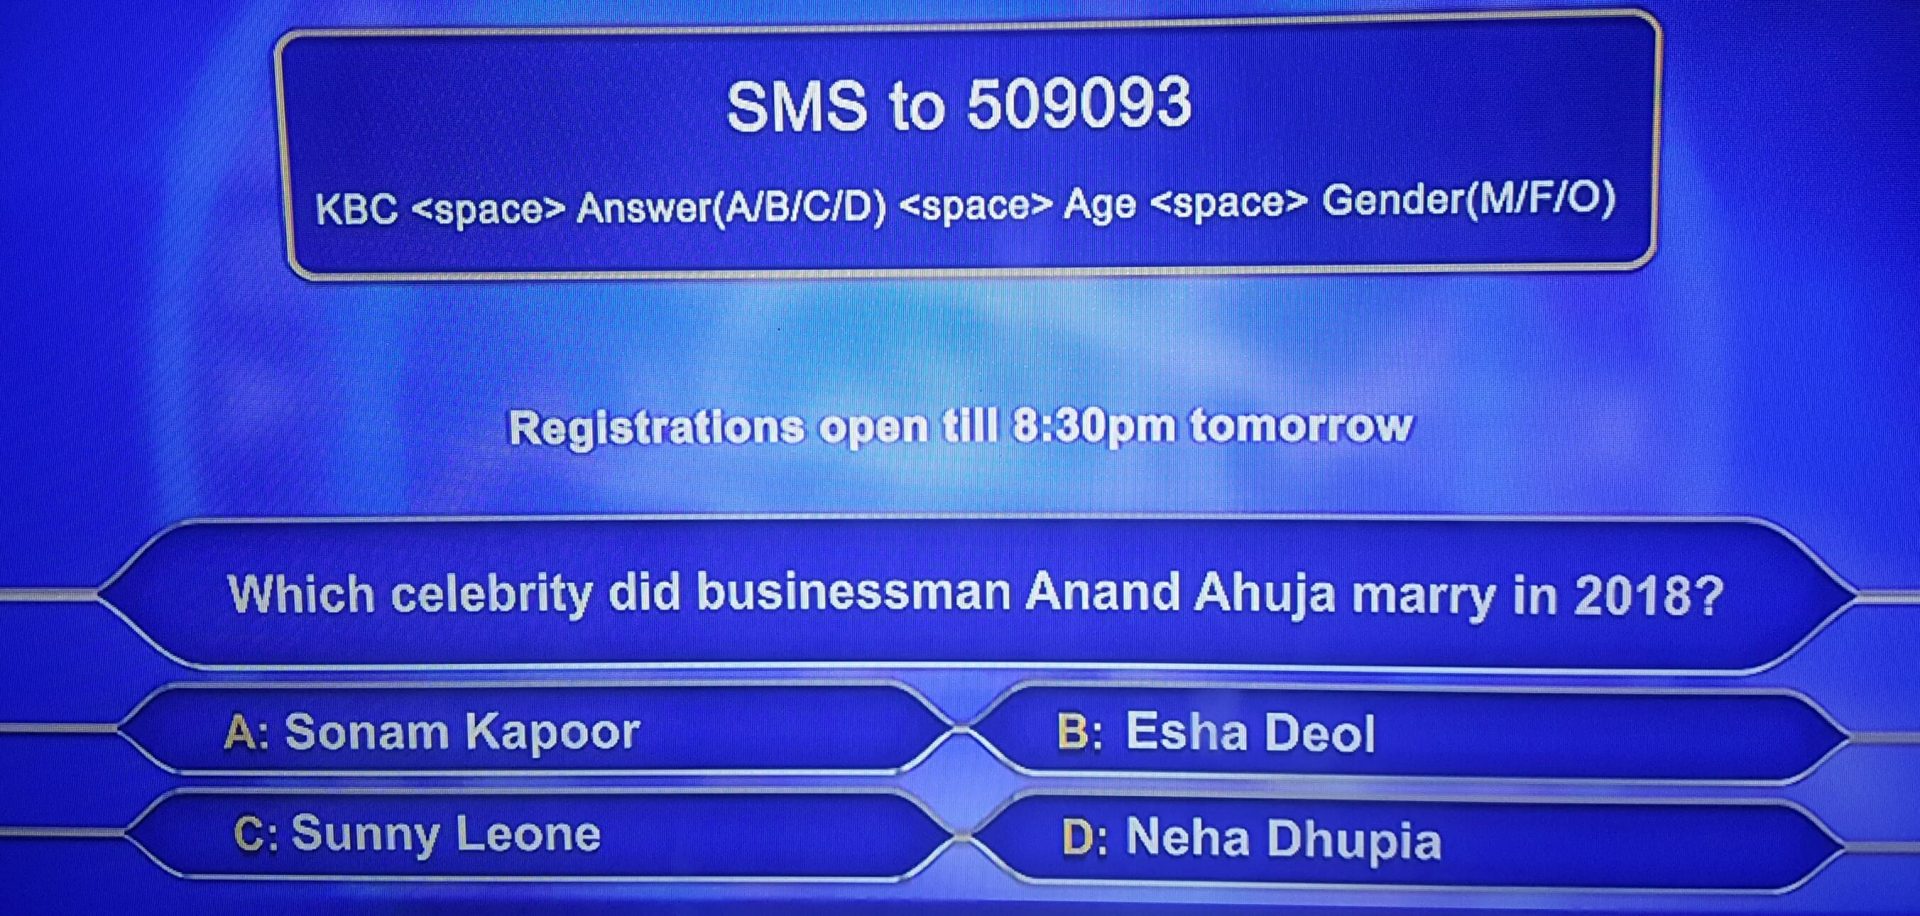 KBC Registration Ques 14: Which celebrity did businessman Anand Ahuja marry in 2018?